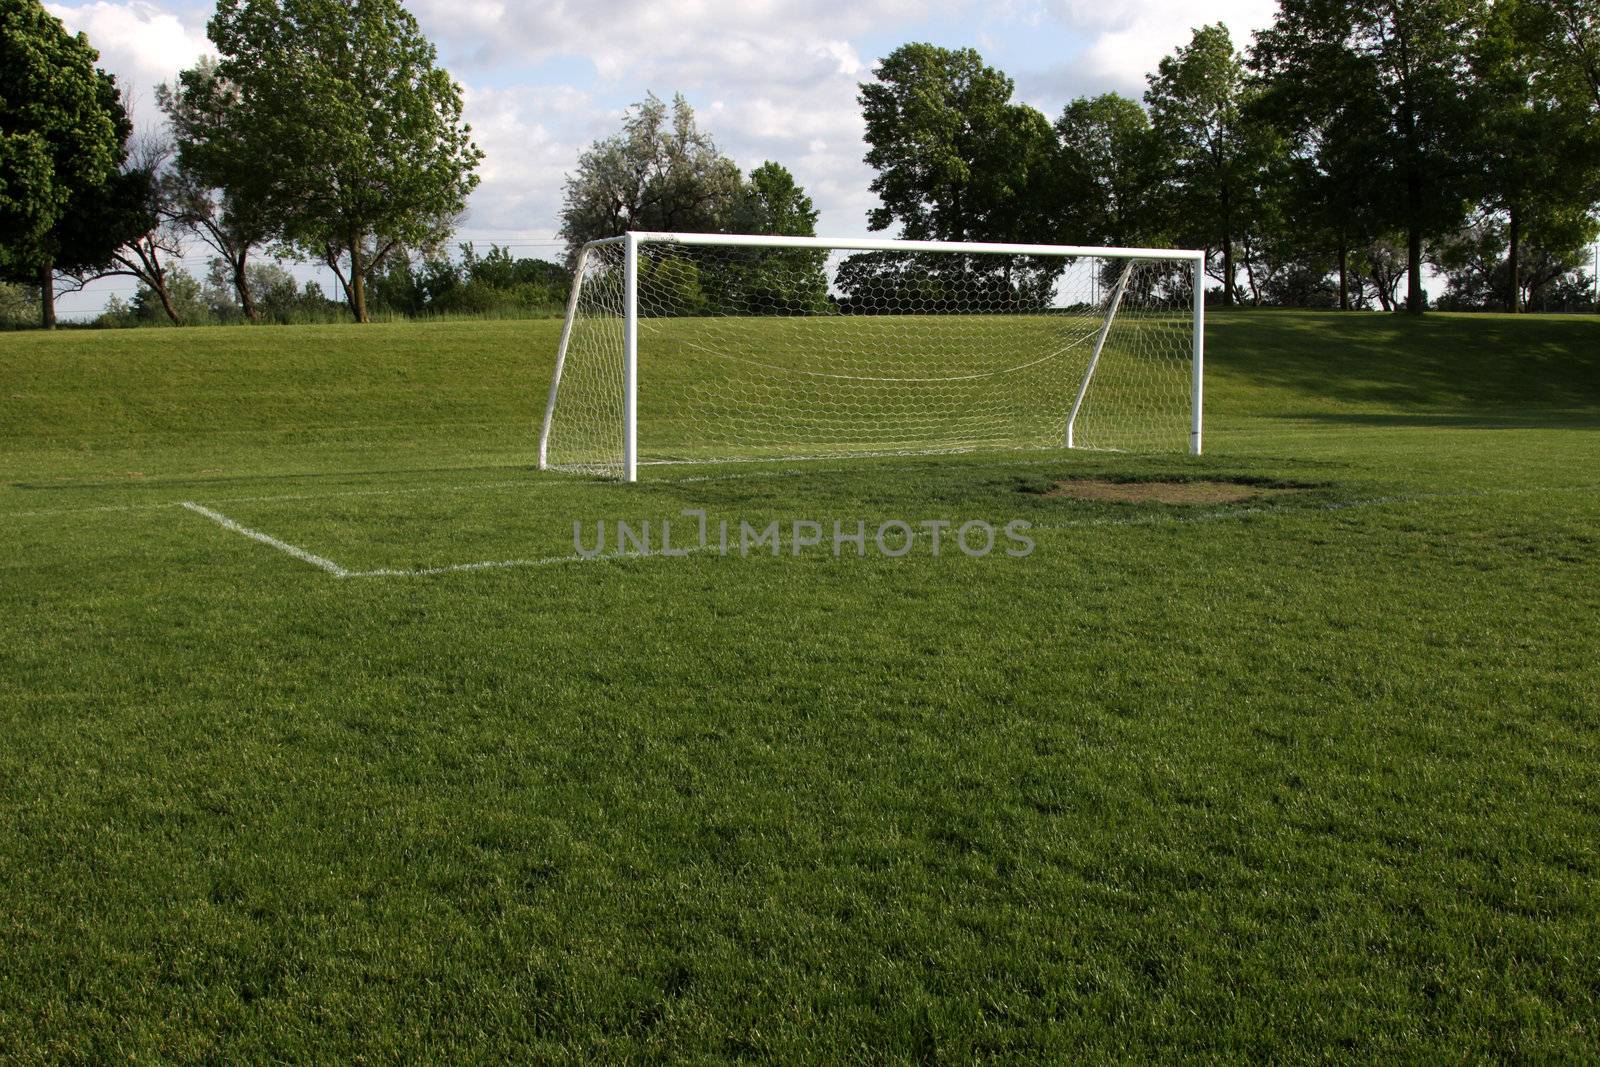 A view of a net on a vacant soccer pitch.
